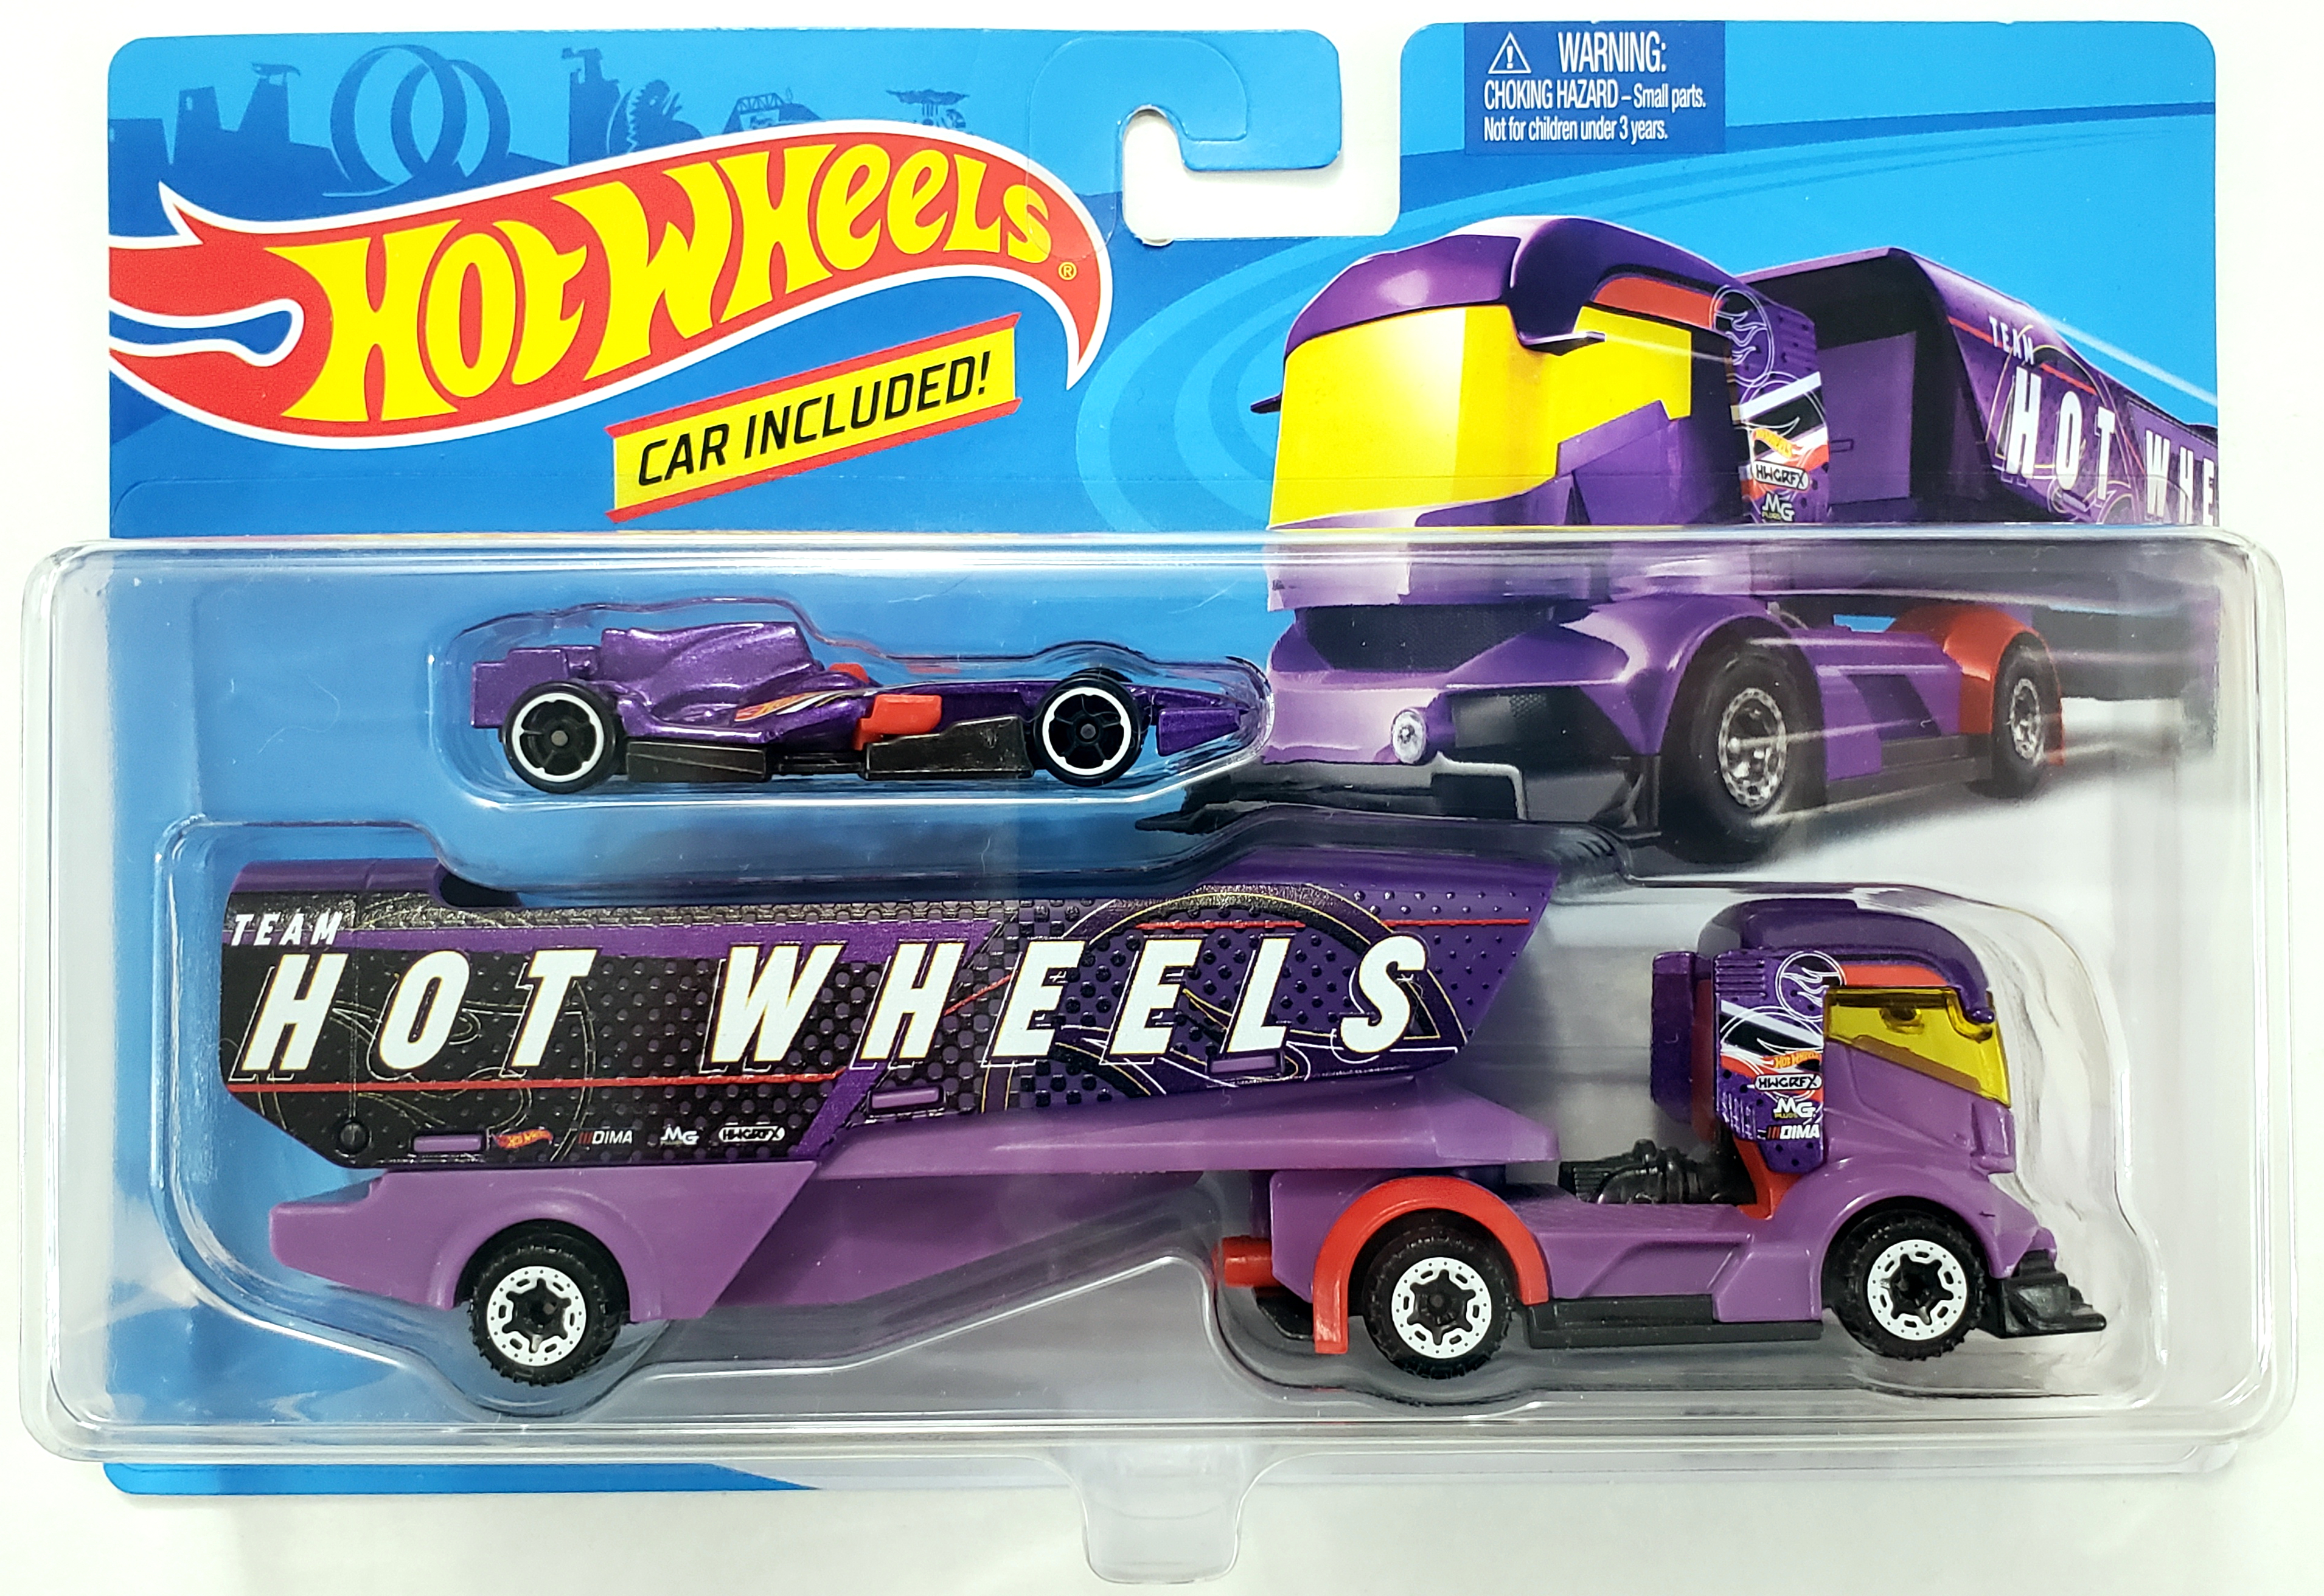 Hot Wheels 2019 Super Rigs Big Rig Heat w/vehicle included #FKW92 1:64 Scale 